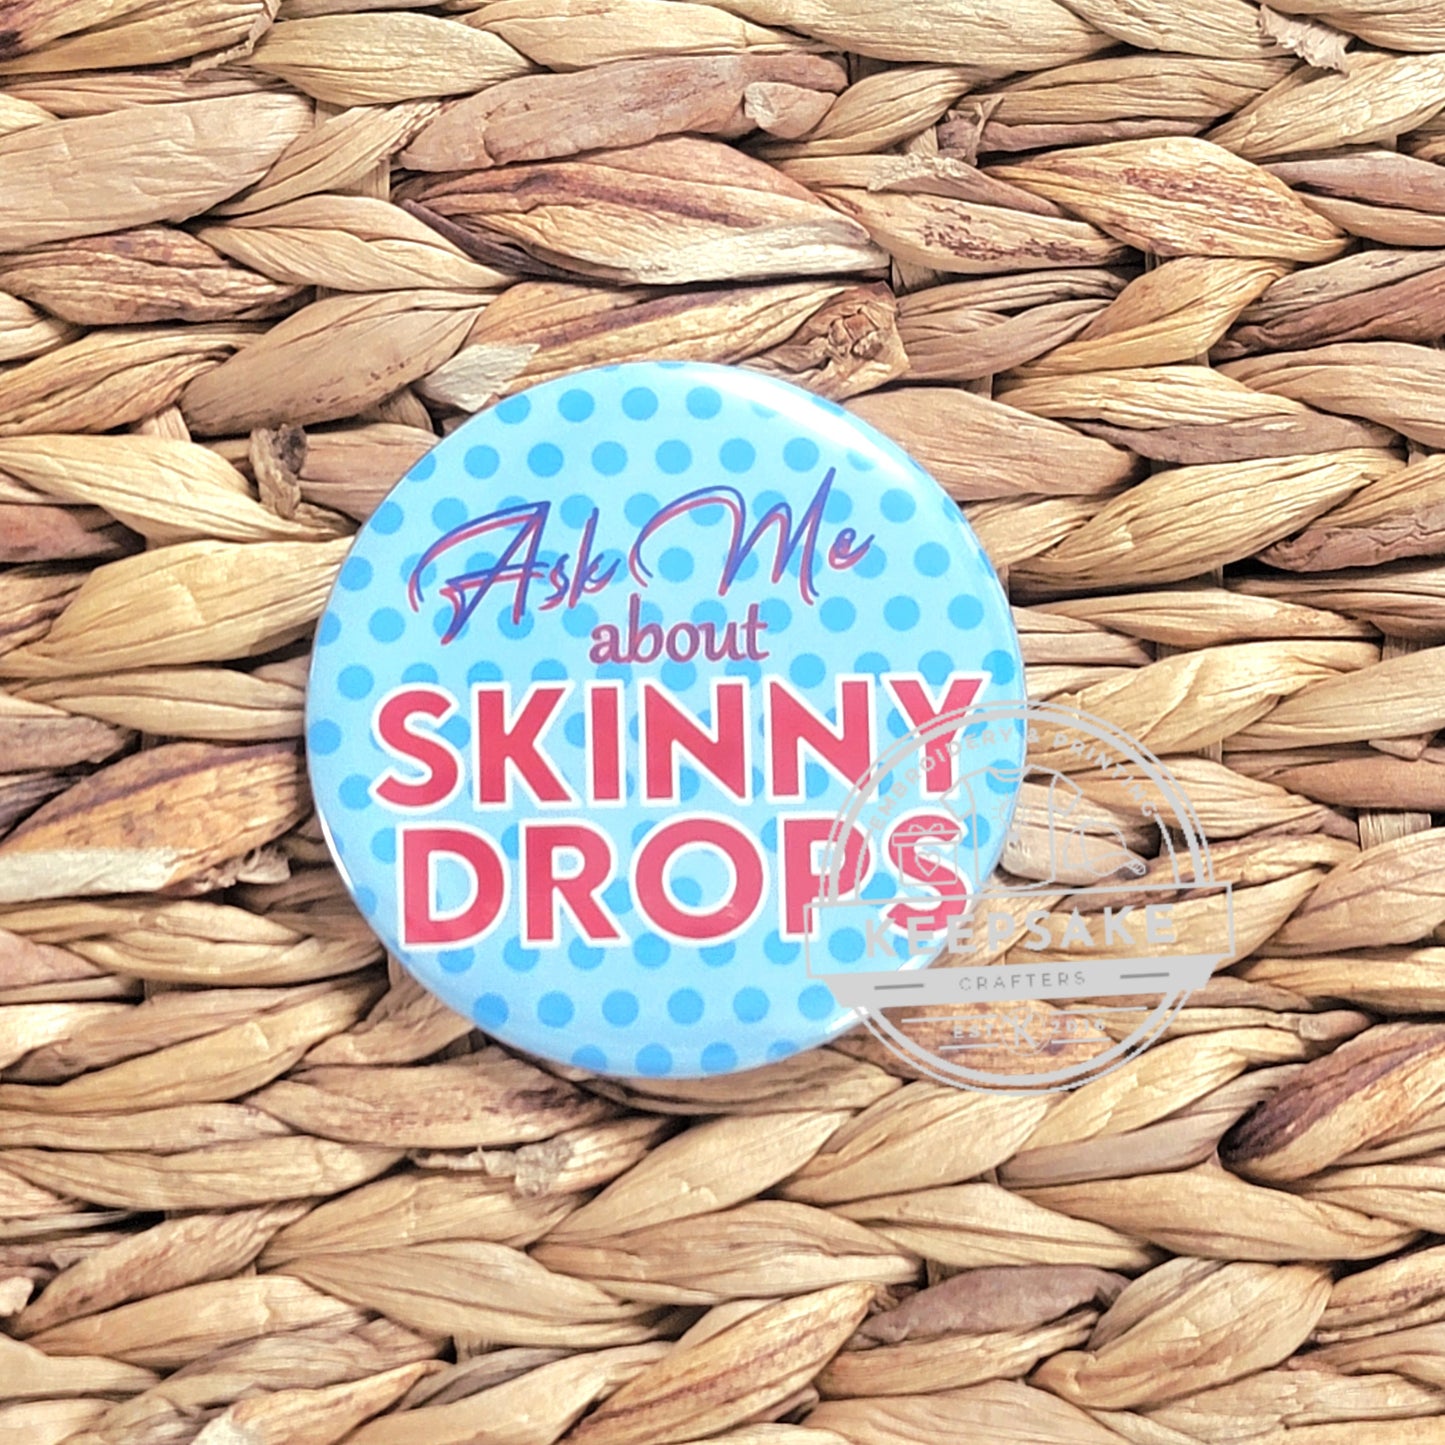 Ask Me About Skinny Drops Pin